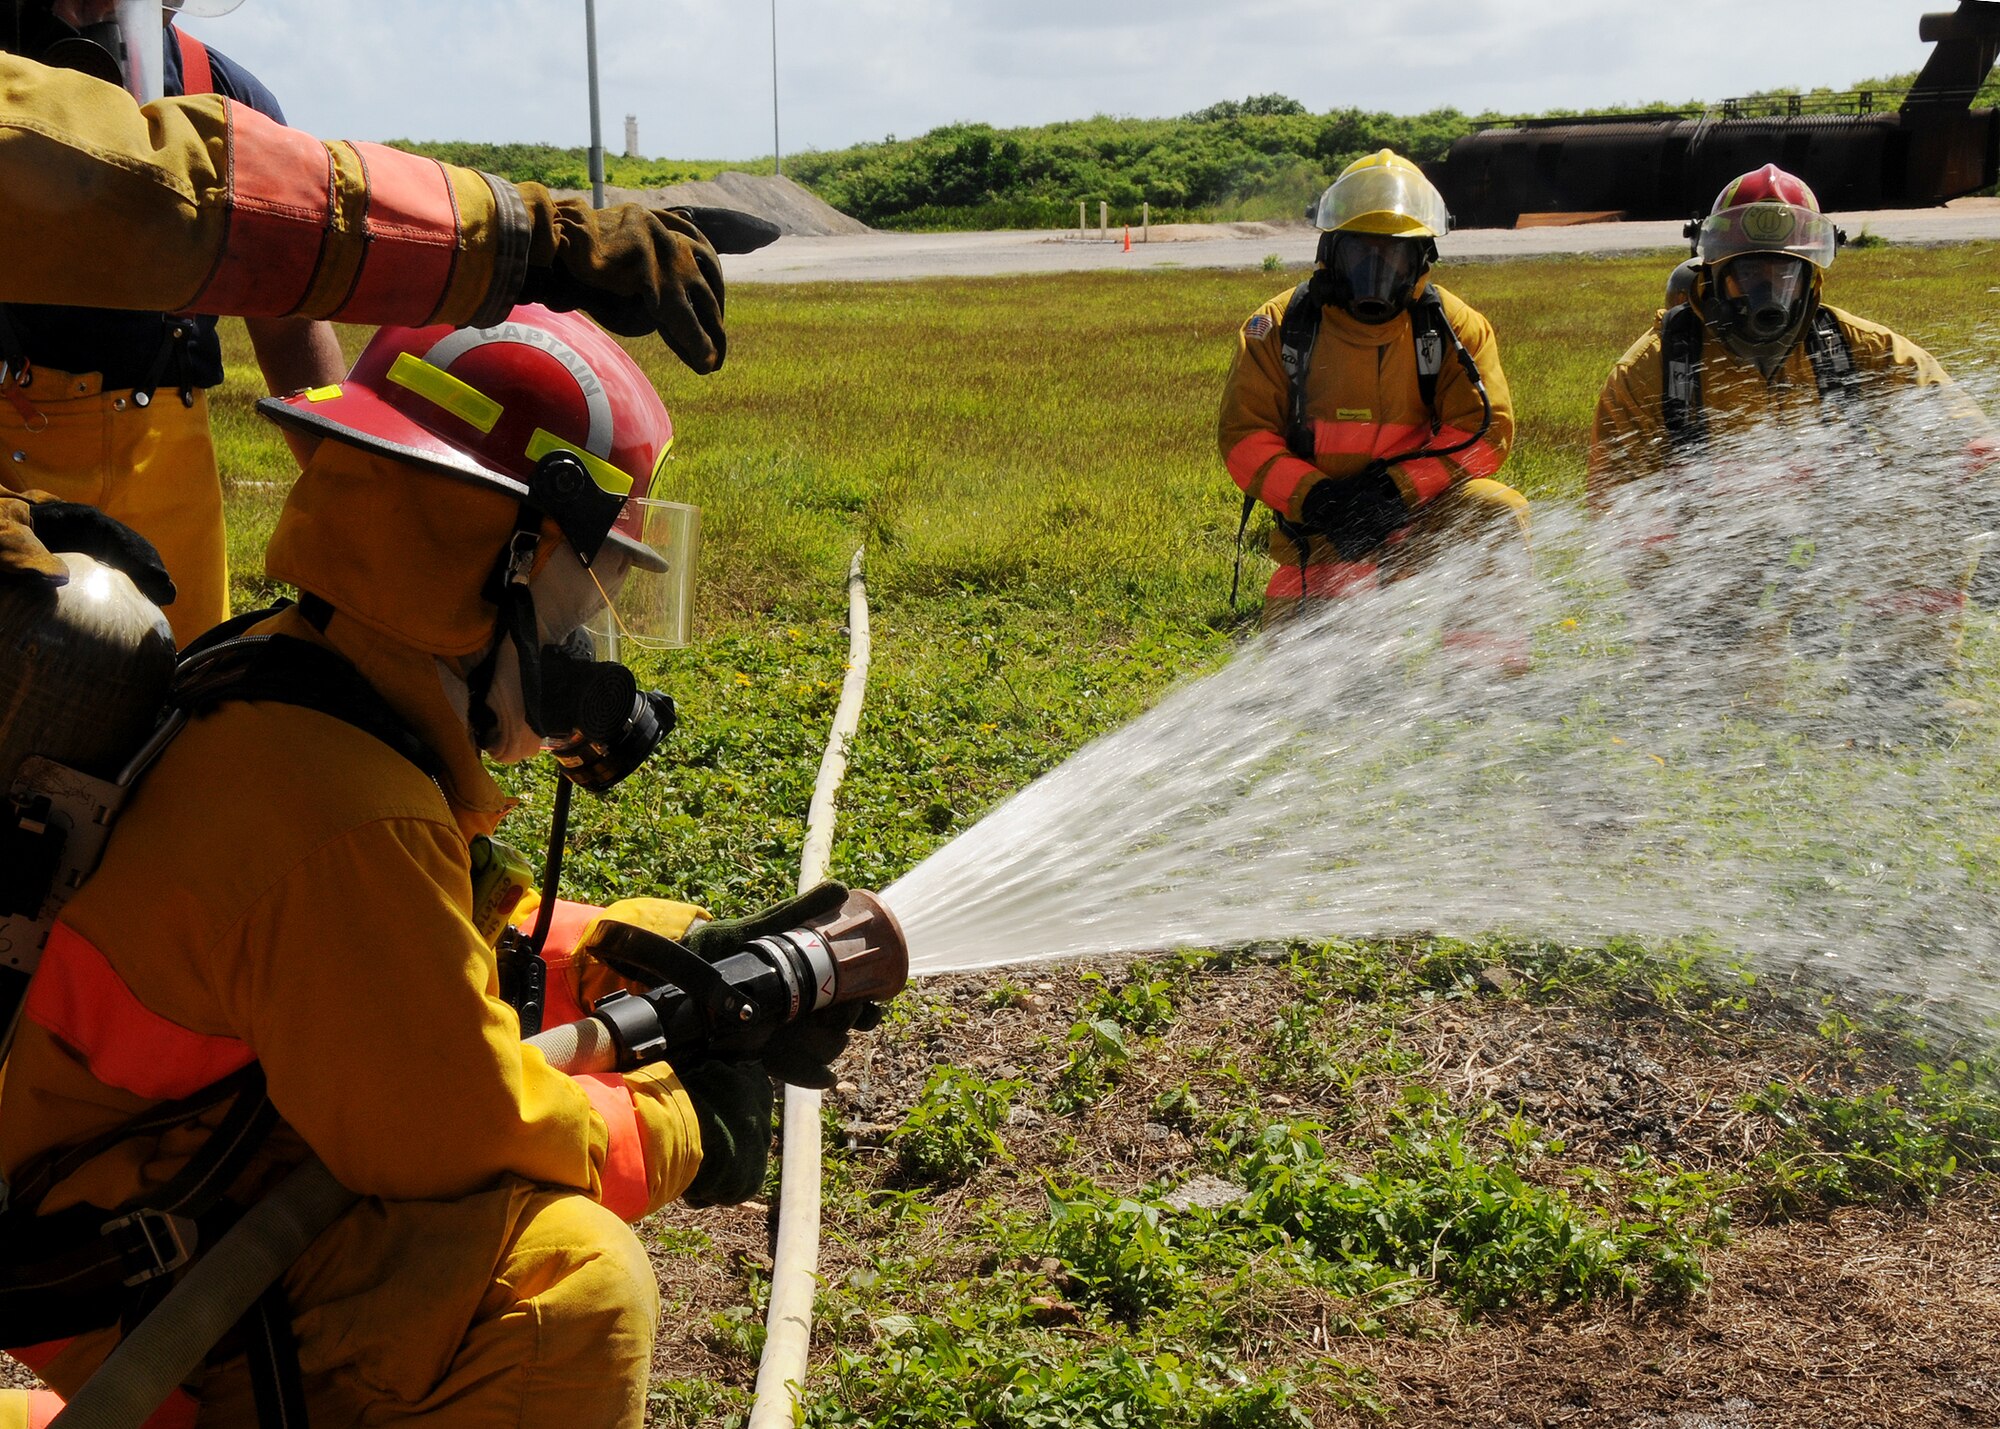 ANDERSEN AIR FORCE BASE, Guam -U.S. Navy Firemen from Naval Base Guam check the water pressure of the fire hose before conducting the interior structural fire training here Nov. 22. The week long Fireman 1 and Fireman 2 training was held to obtain certifications for new firefighters and to help them learn from veteran members of the department. (U.S. Air Force photo by Senior Airman Nichelle Griffiths)